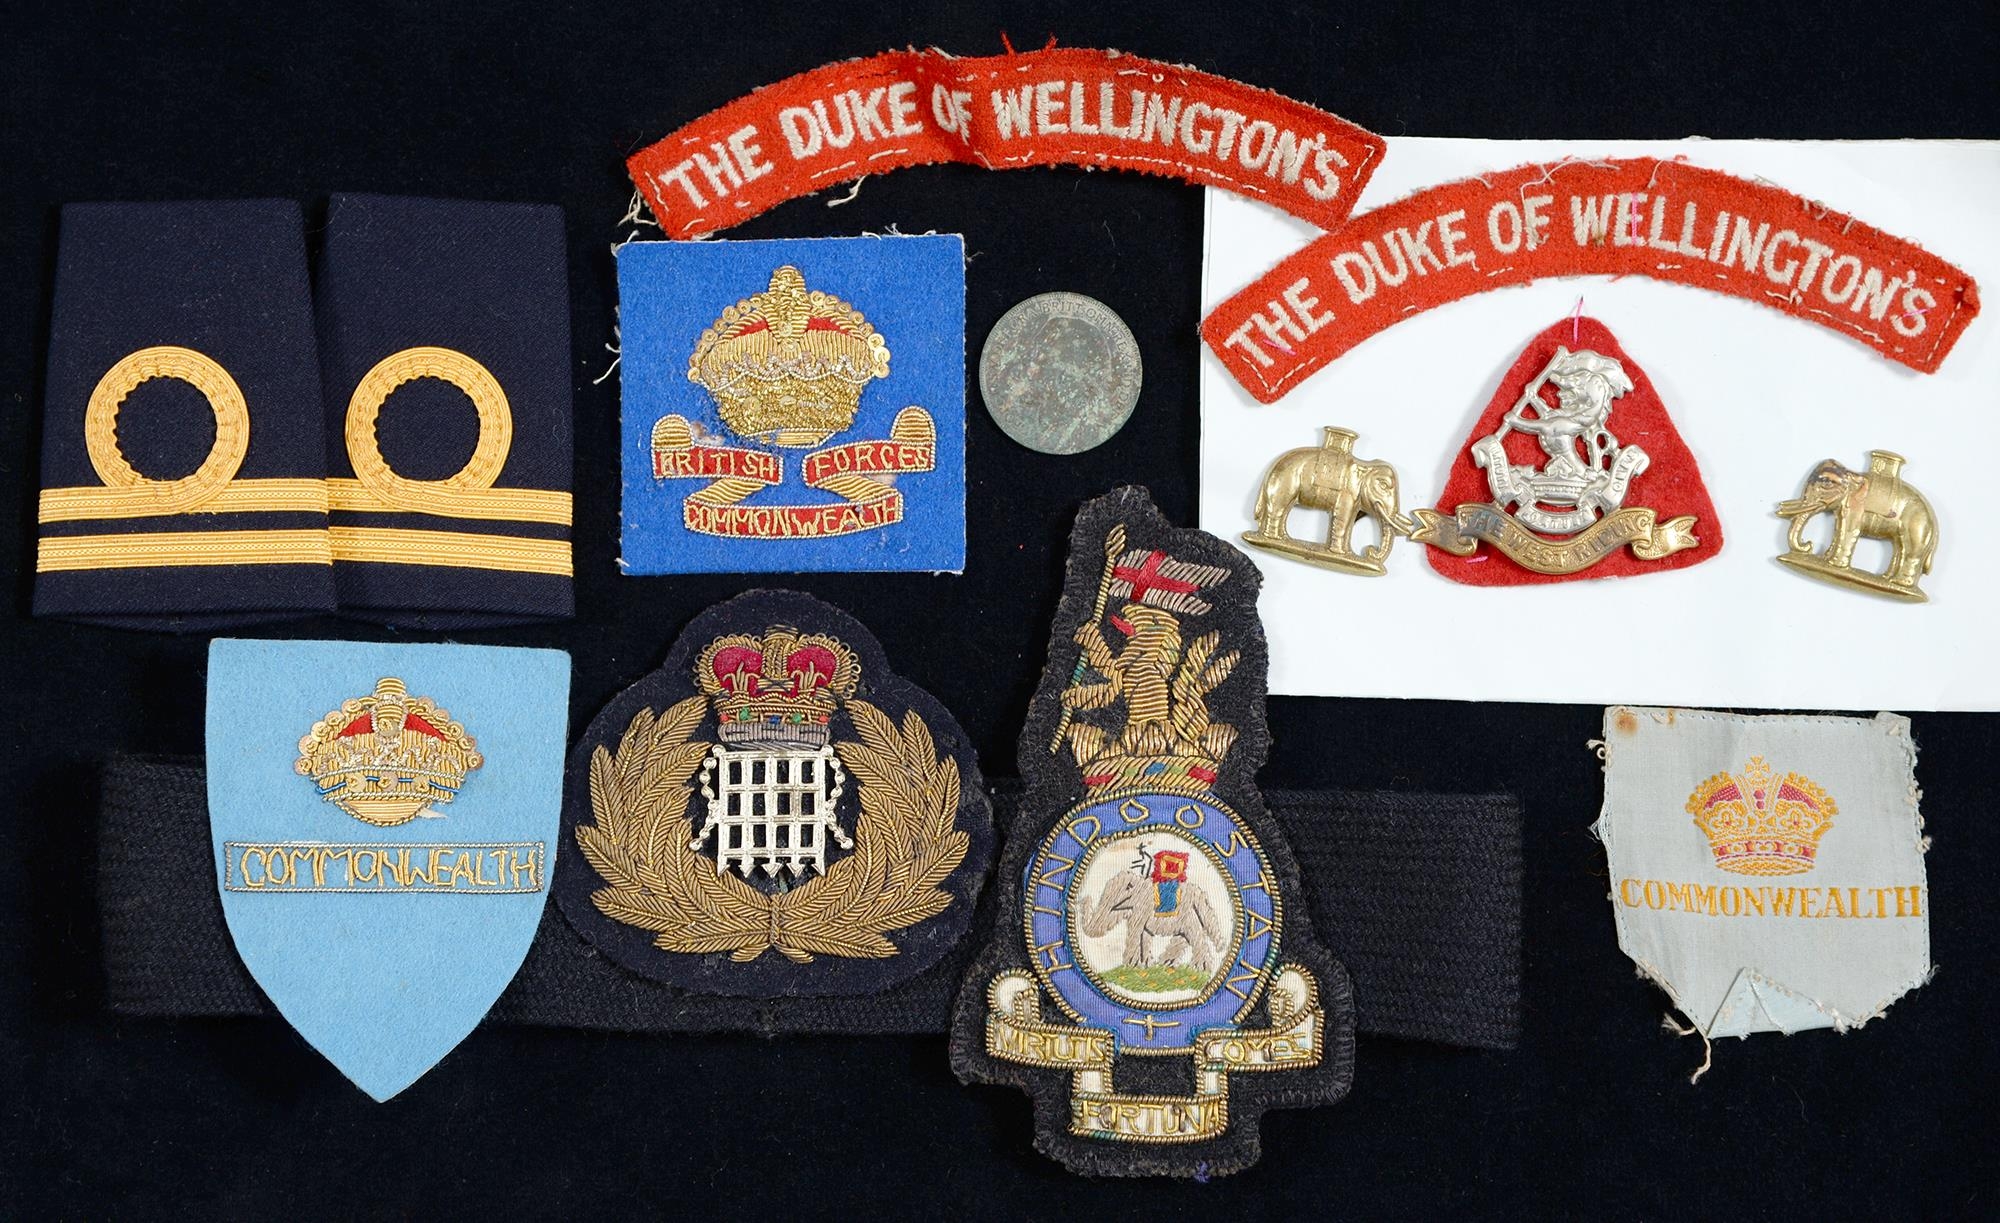 Miscellaneous British army and naval cloth insignia and Duke of Wellington's Regiment cap and